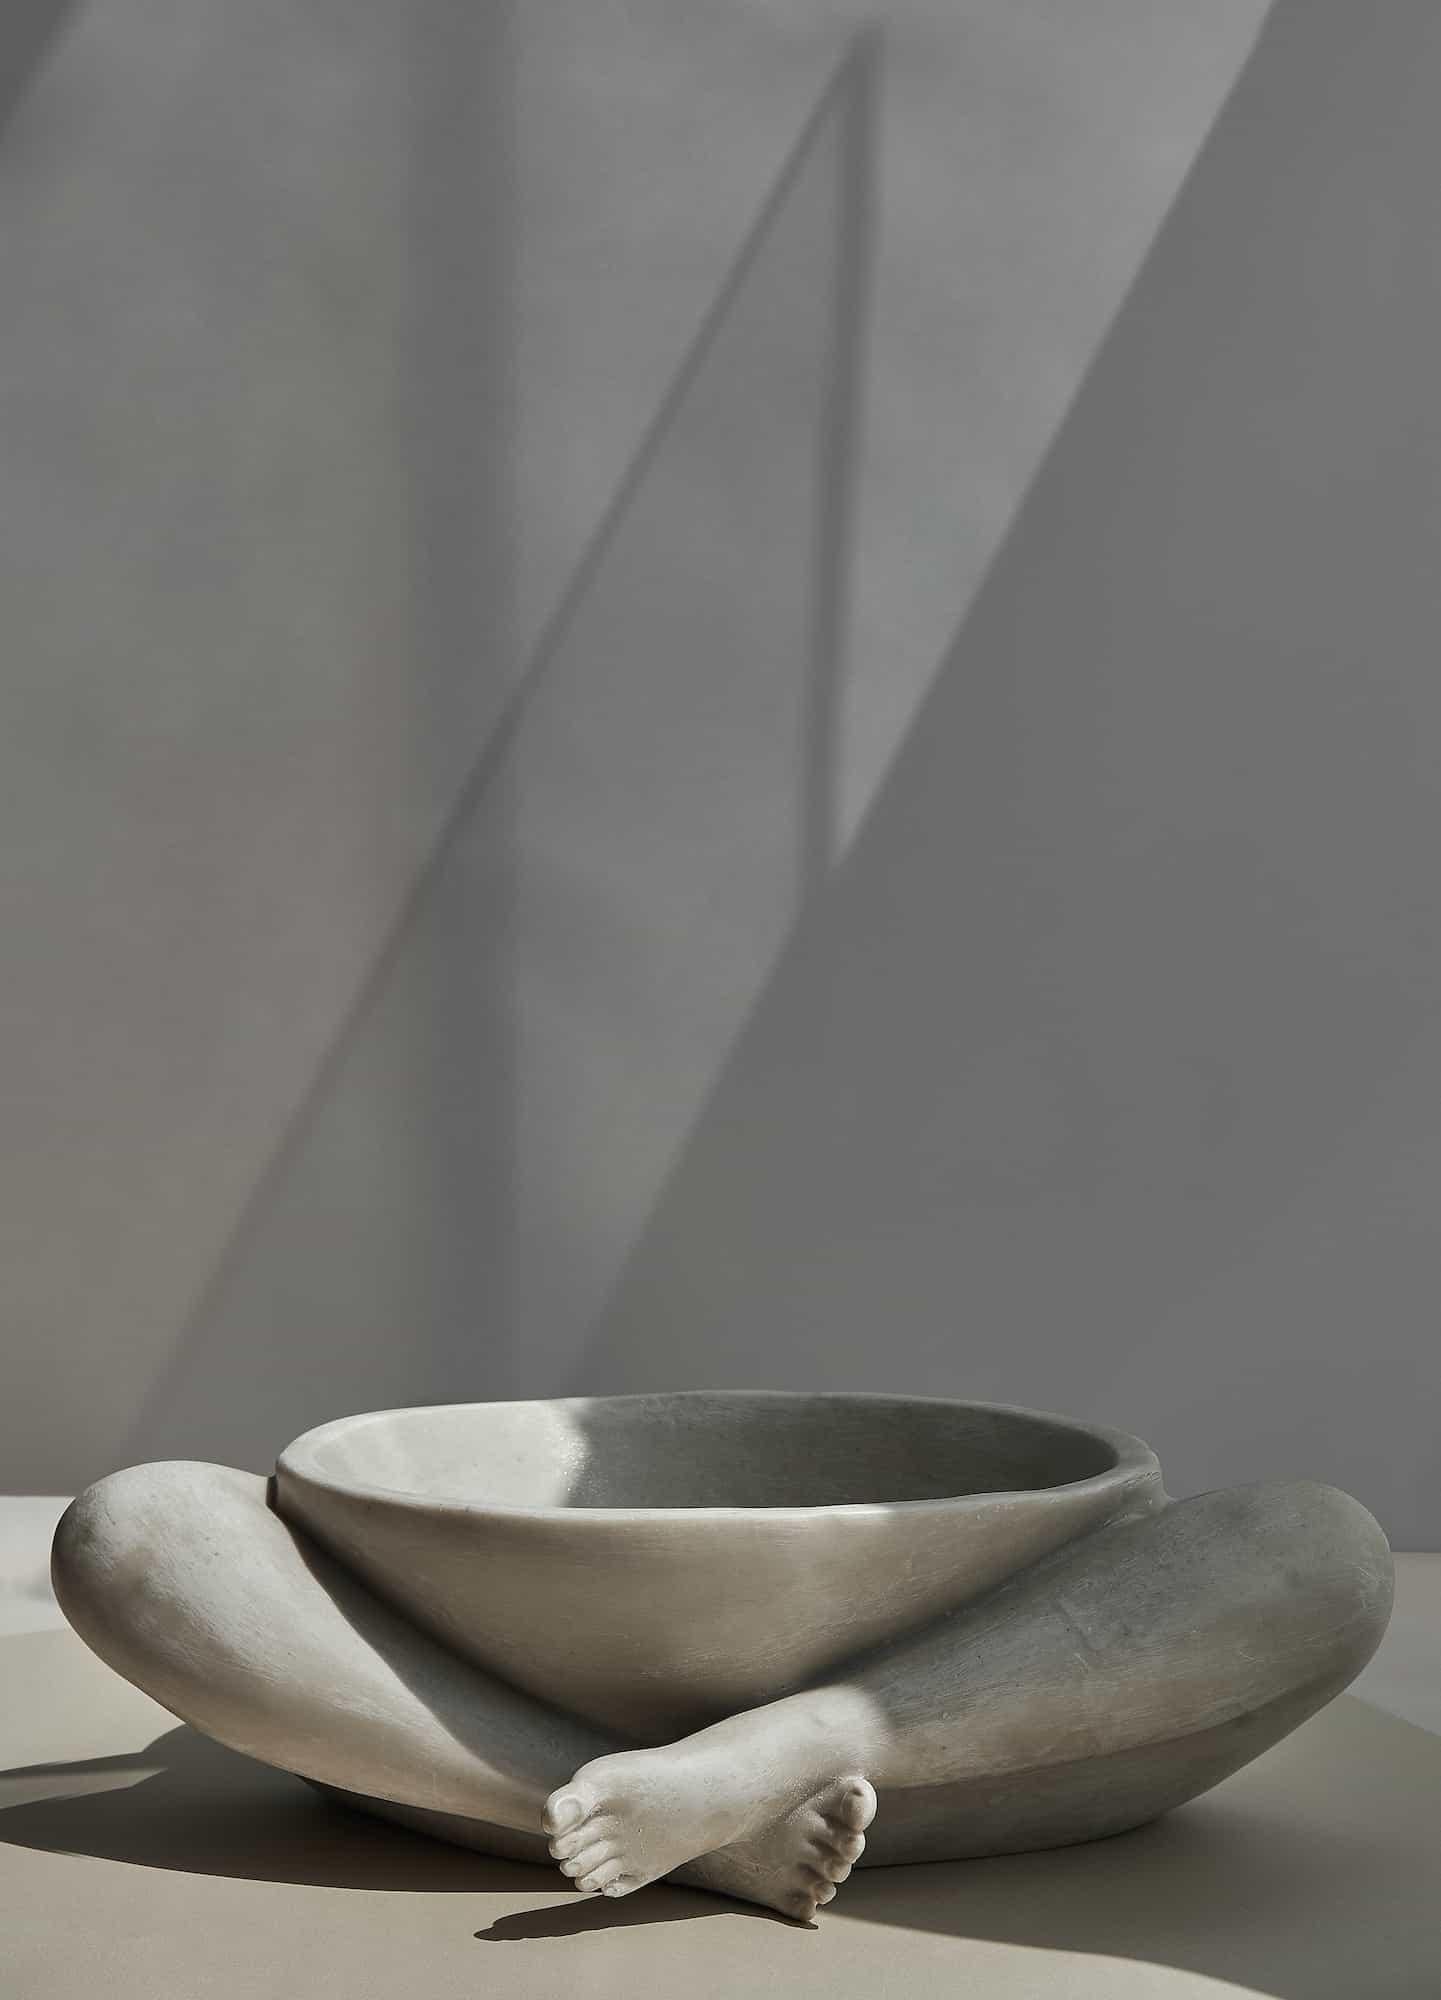 Sukhasana II bowl by Marcela Cure.
Dimensions: W 40.5 x D 28 x H 13 cm.
Materials: resin and stone composite.

Our Sukhasana II is our bowl version of our Sukhasana sculpture, inspired by the calming pose commonly used for meditation and